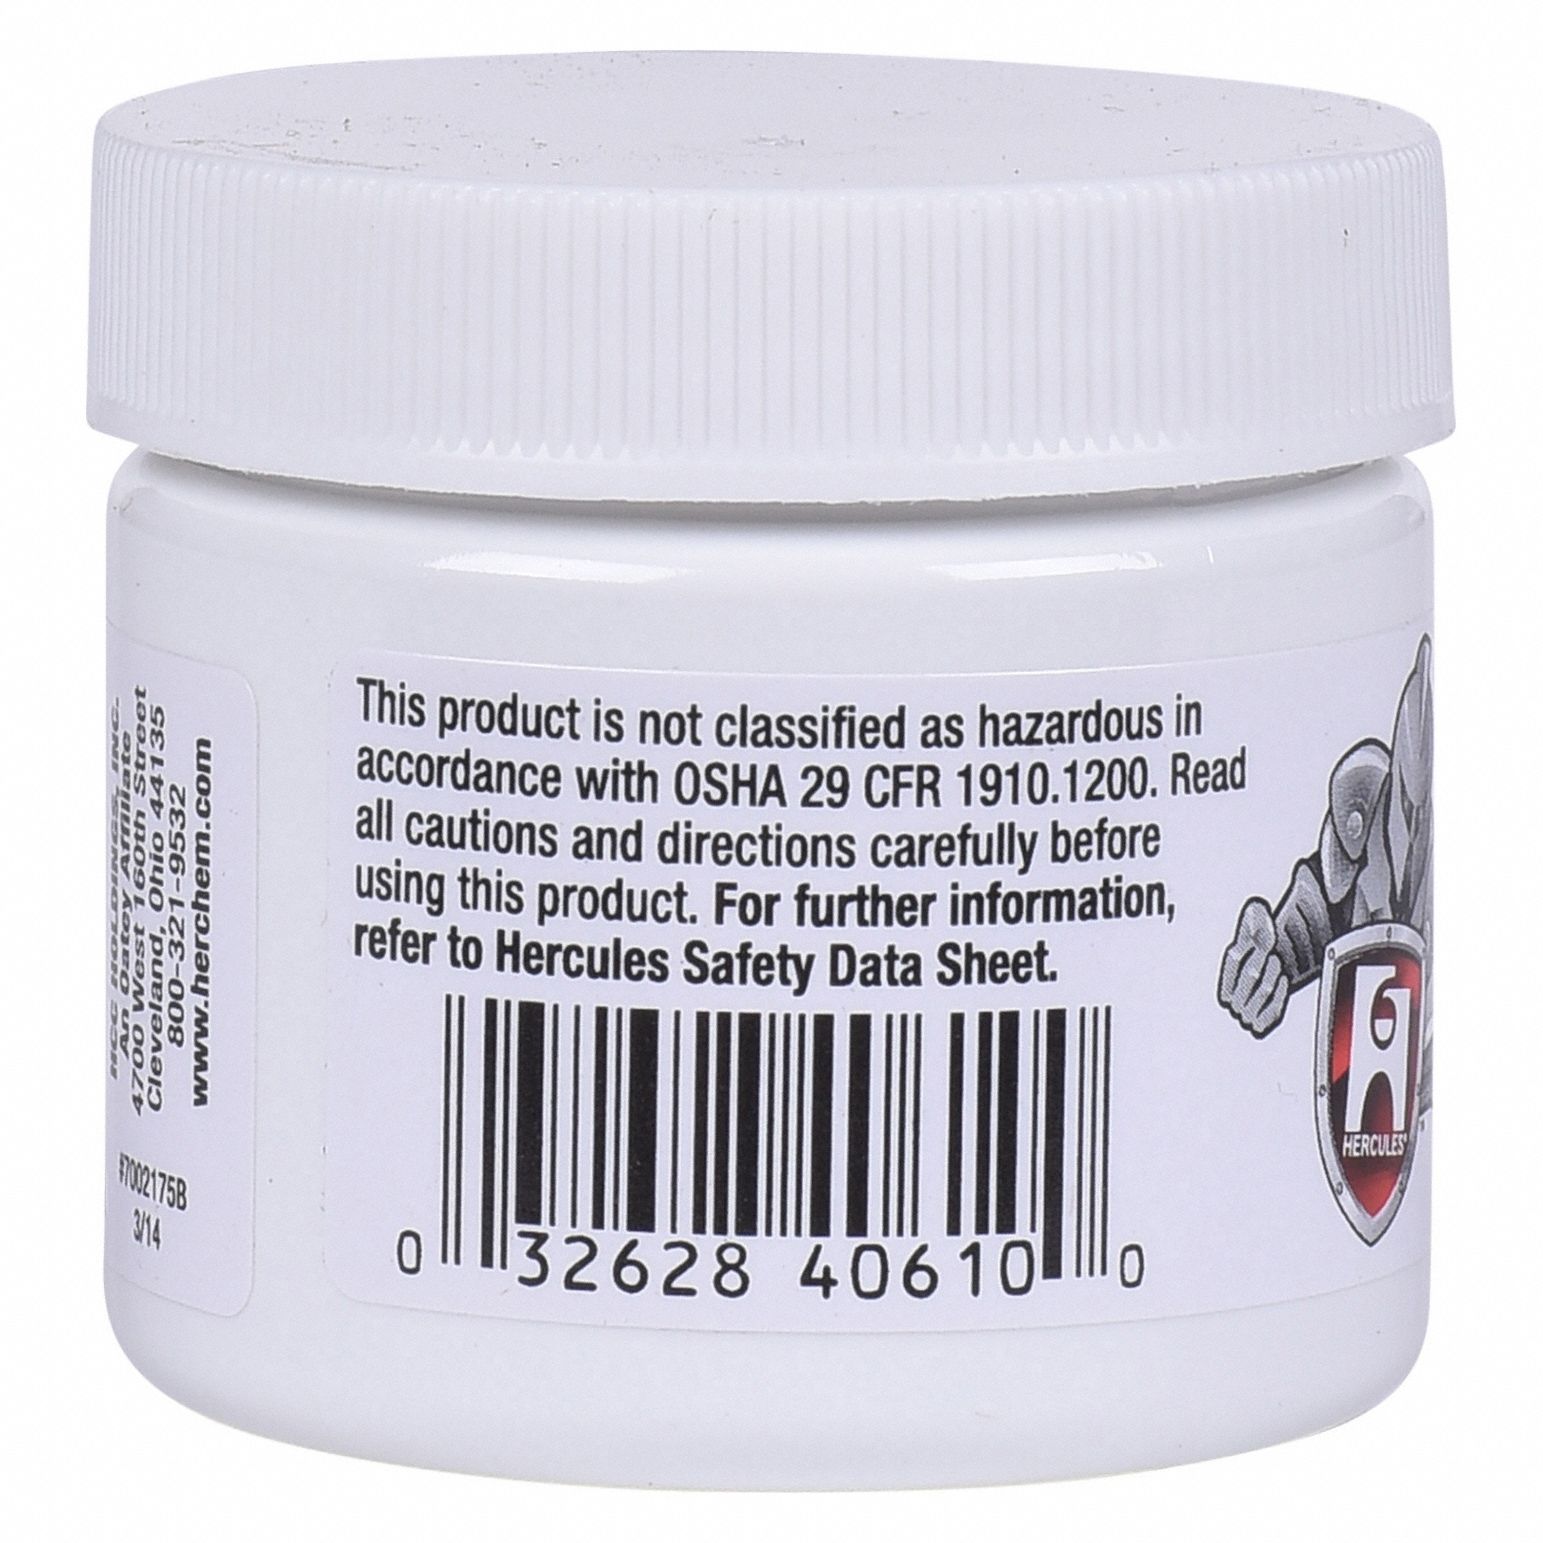 Silicone Plumbers Grease, 2 Oz.